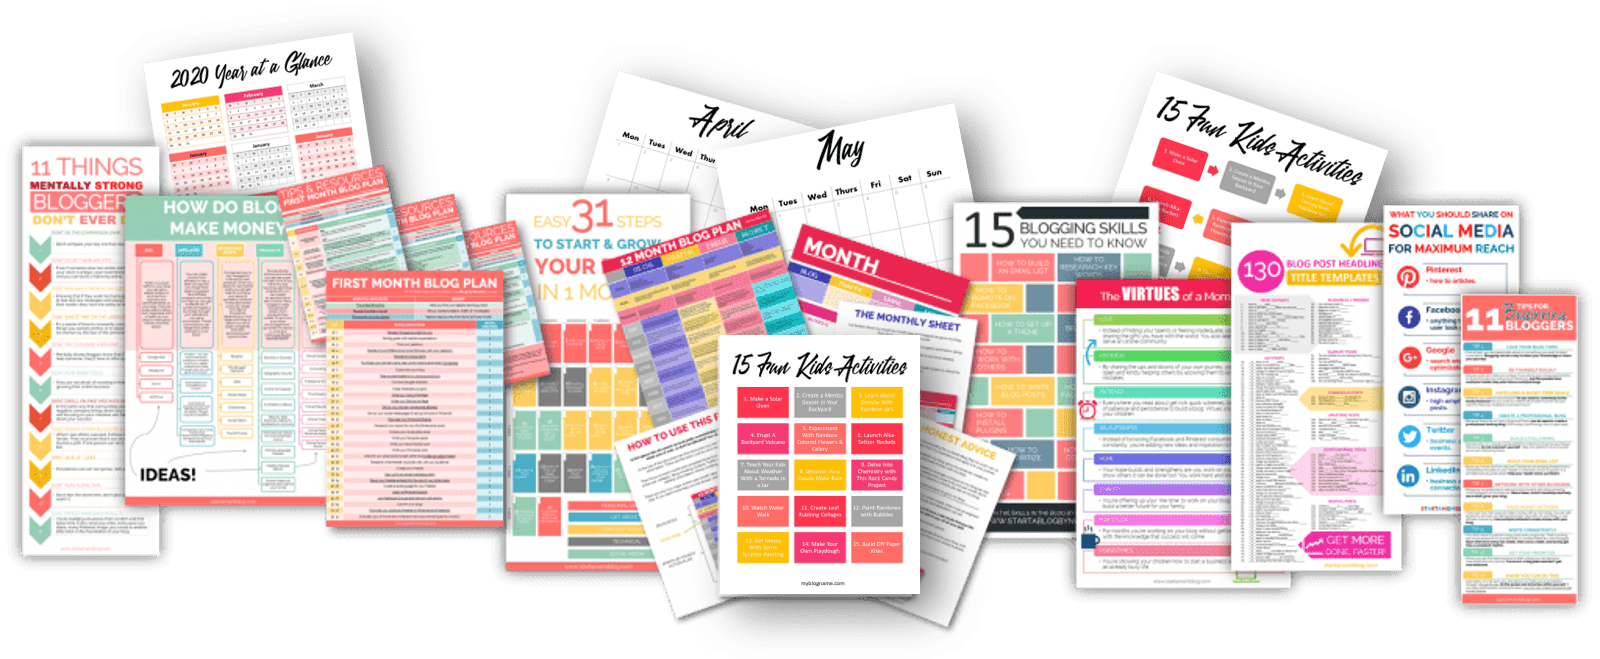  /></p><p>In <strong>Printables by Number</strong> I’ll teach you how:</p><ul><li>To use 3 different programs to create printables</li></ul><p>The Power of PowerPoint</p><ul><li><strong>In depth focus on creating printables in PowerPoint – OFFICE 365</strong><ul><li>How to set <strong>default templates</strong></li><li>How to import a <strong>fancy font</strong></li><li>How to make a <strong>weekly, monthly and yearly calendar</strong></li><li>How to create pretty presentations</li><li>How to <strong>create infographics</strong></li><li>How to <strong>make a 3D layflat overlay image</strong> (these images increase conversions!)</li></ul></li></ul><p><strong>Over the shoulder videos </strong>exactly how I create printables, presentations and infographics to grow my traffic. See the thought process I go through to create printables and <strong>follow along step by step.</strong></p><p><img decoding=